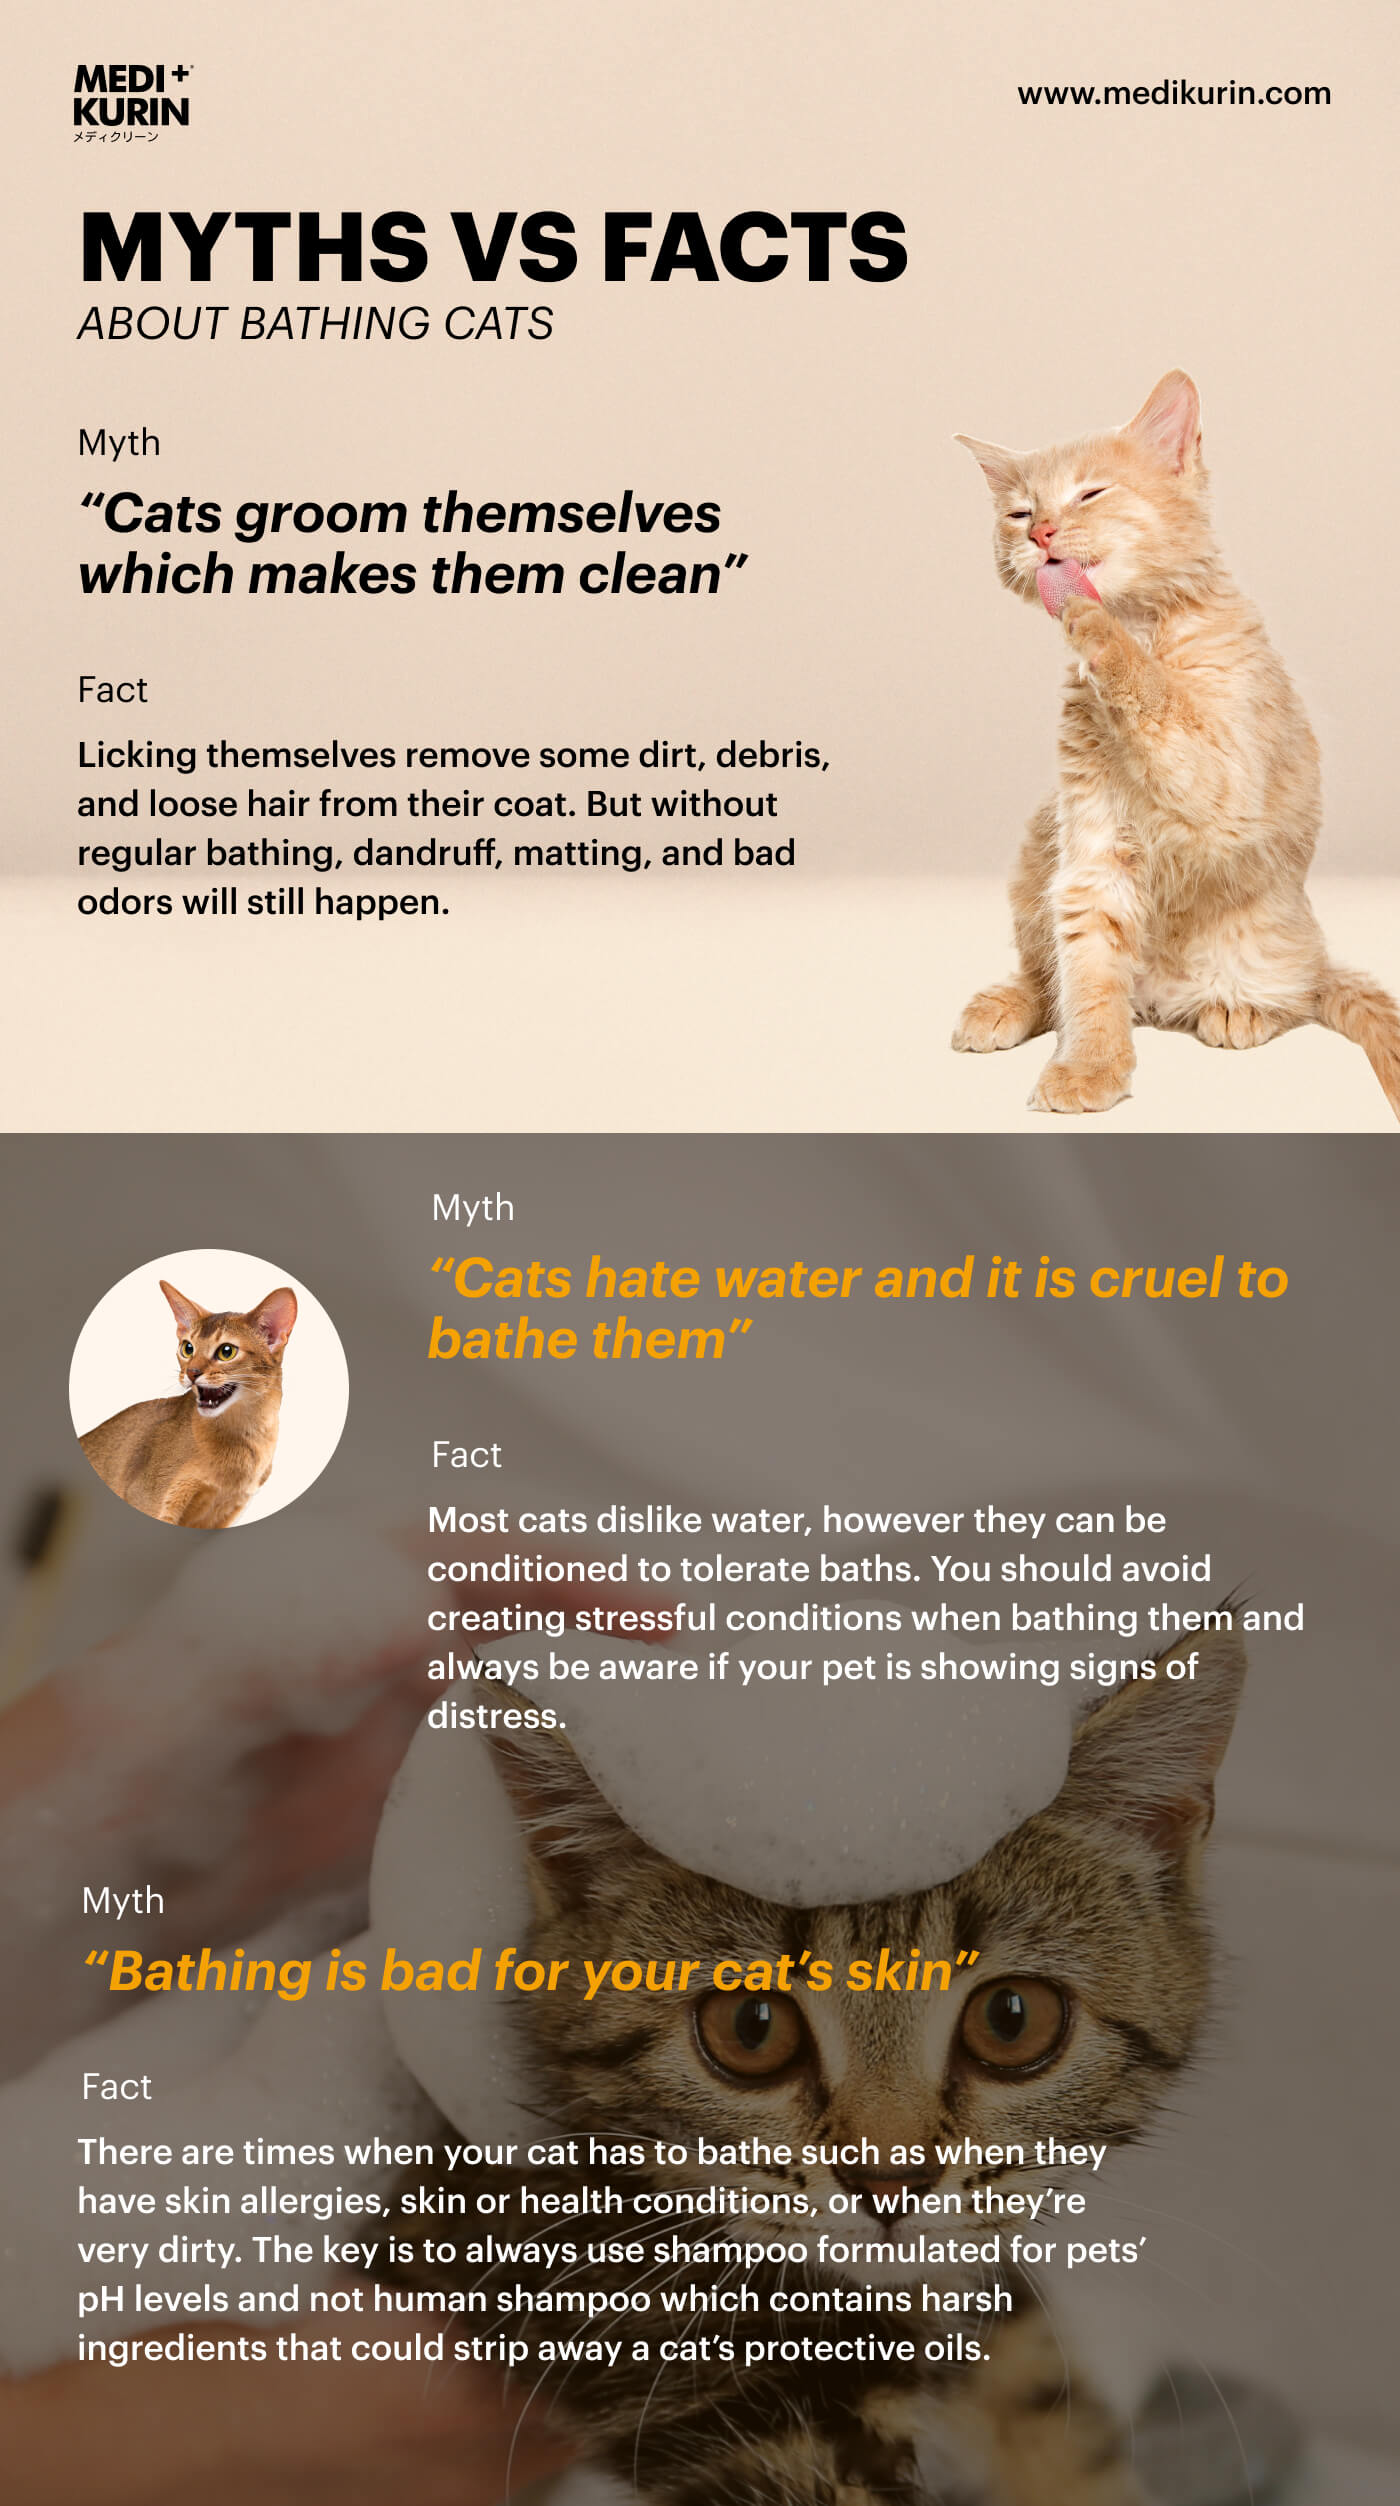 Myths and Facts About Bathing Cats